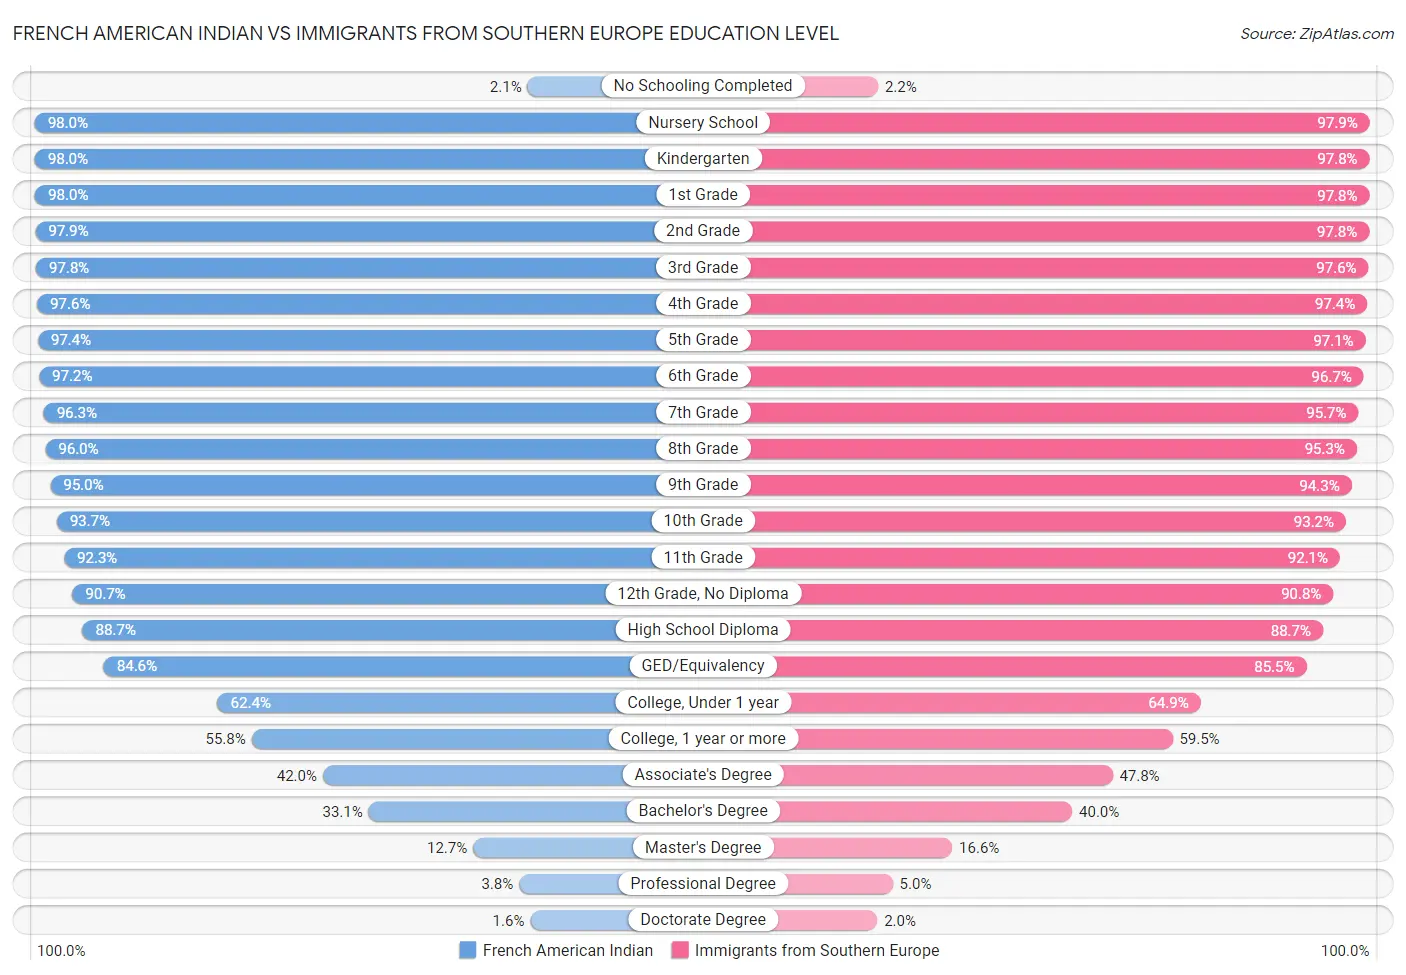 French American Indian vs Immigrants from Southern Europe Education Level